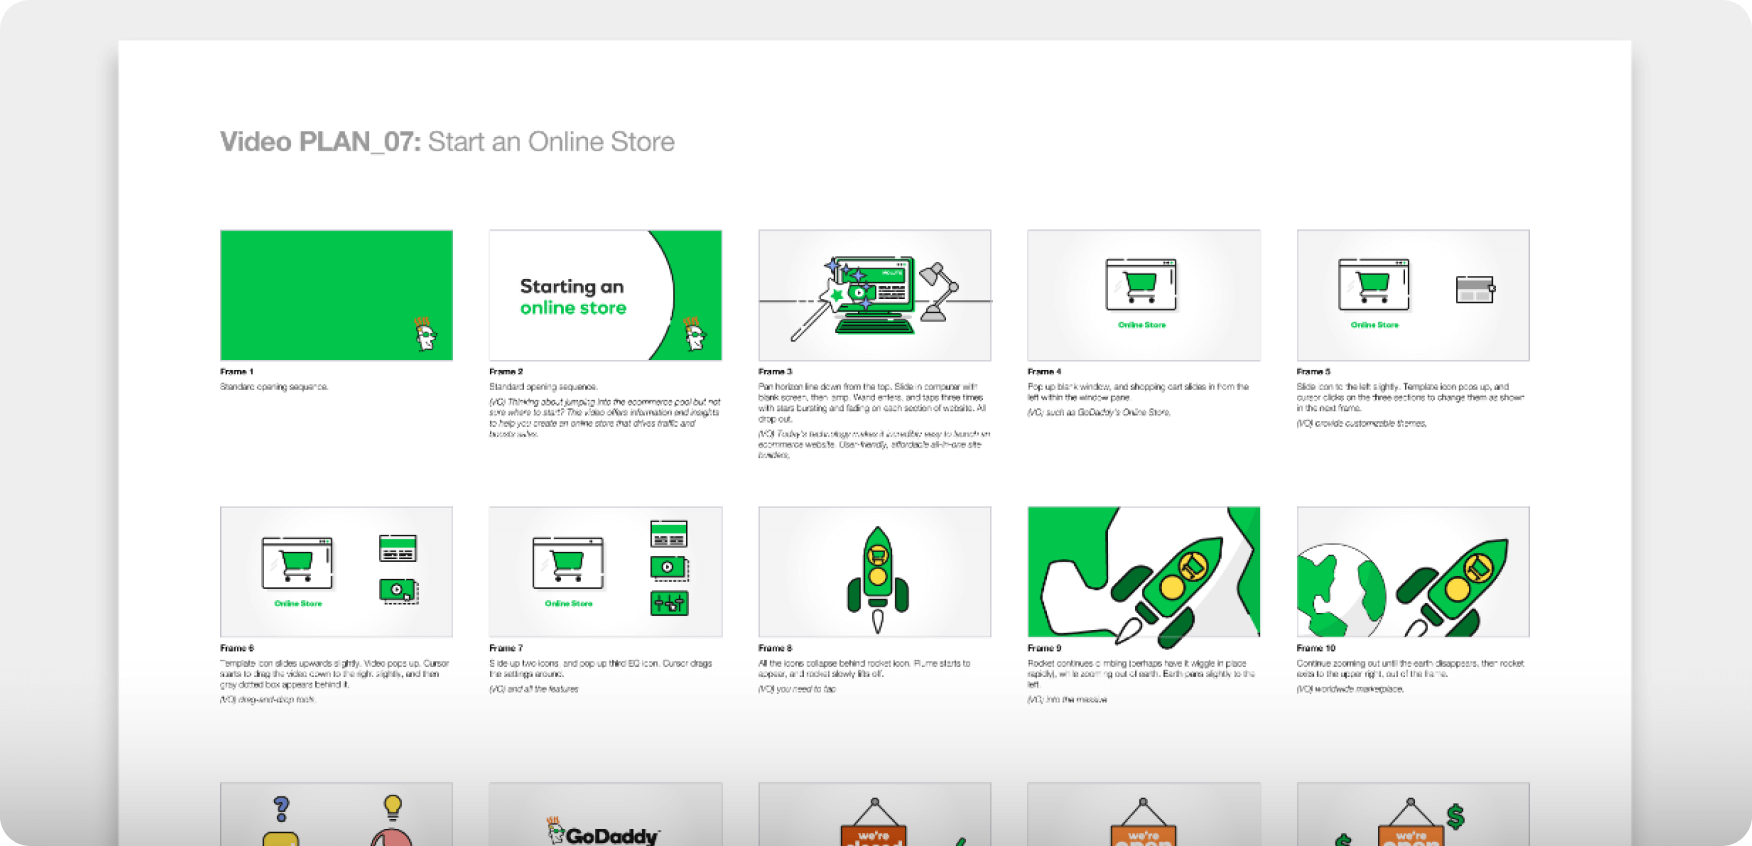 Storyboard design showing GoDaddy Starting an Online Store video animation 